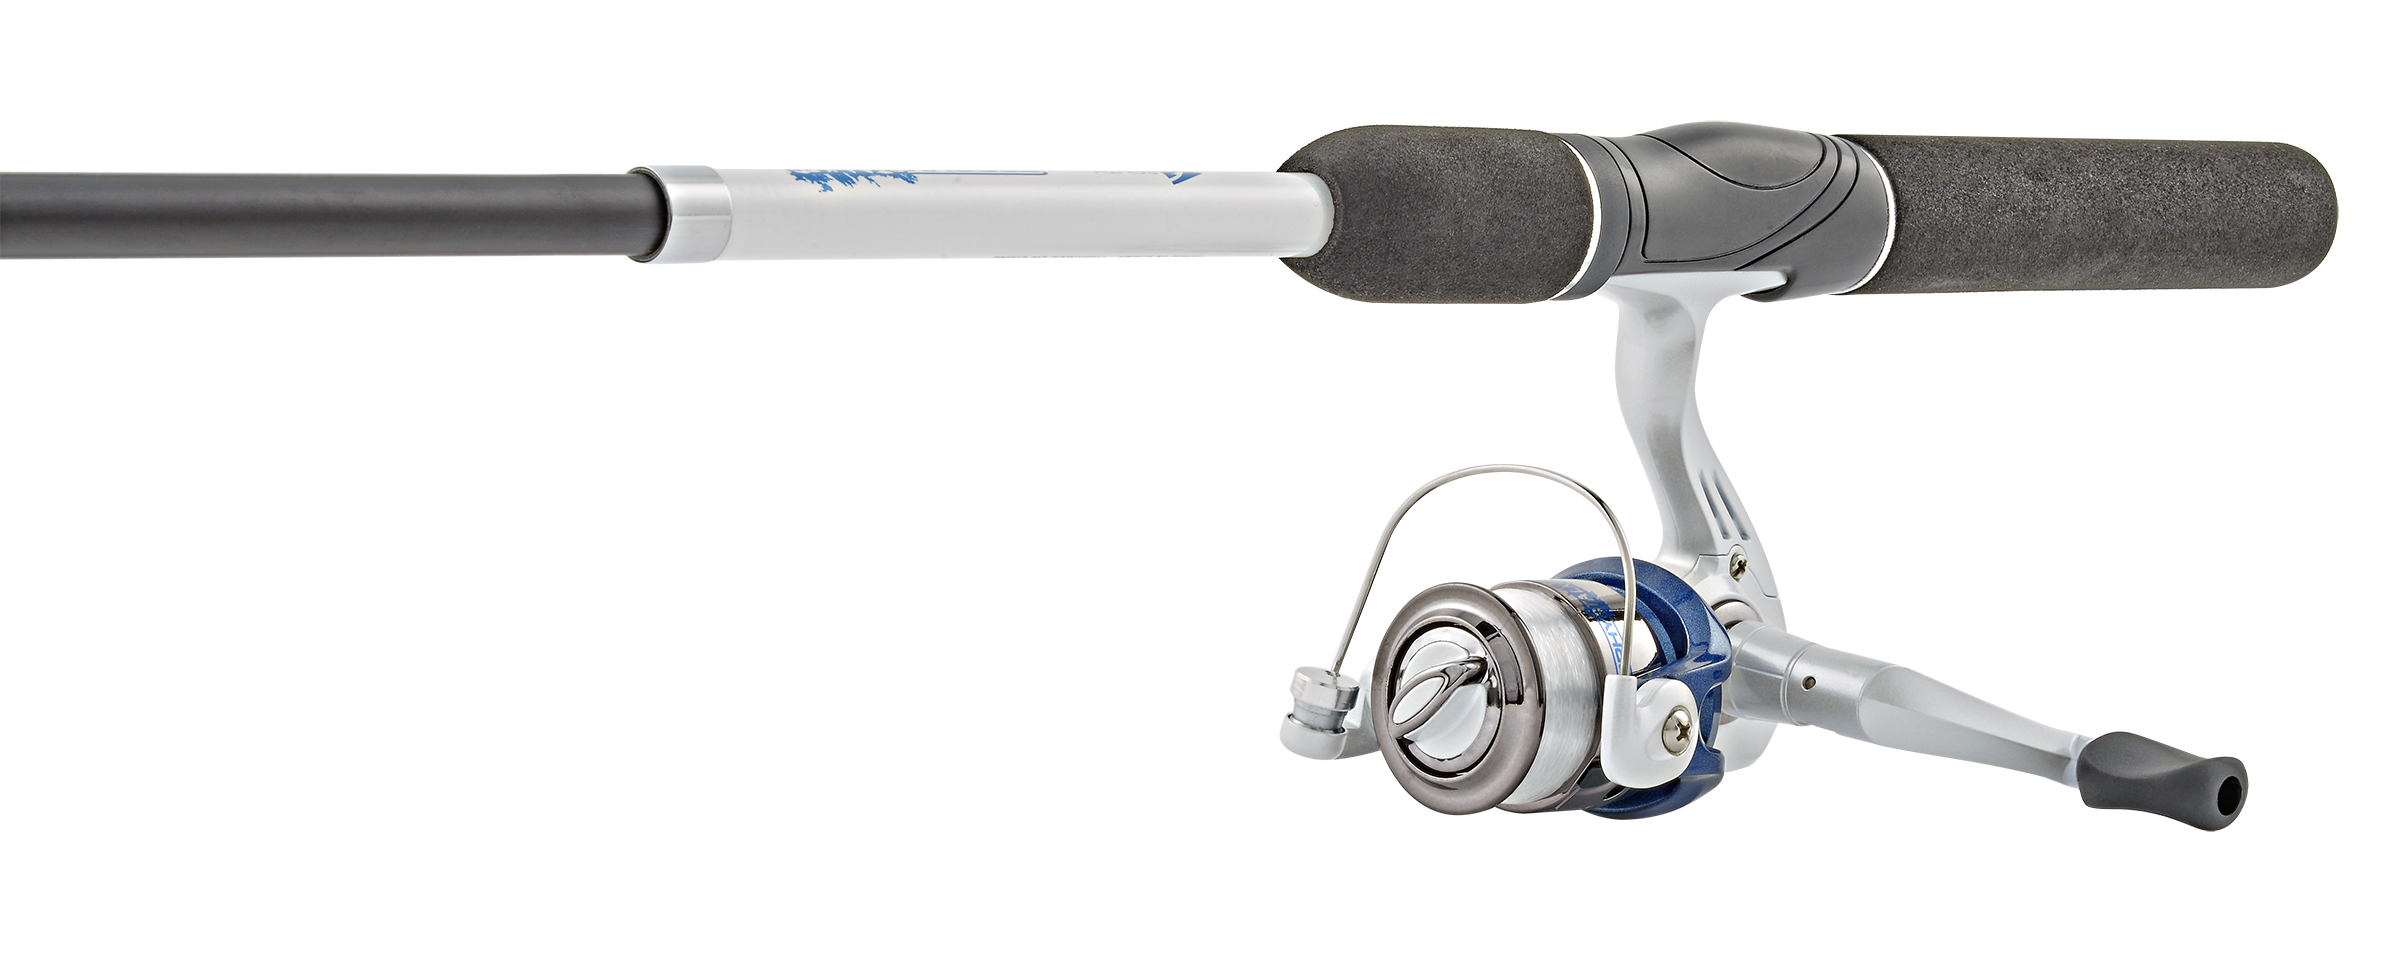 South Bend Trophy Stalker Telescopic Spinning Rod and Reel Combo - 5'  TS10/505LSPT — CampSaver